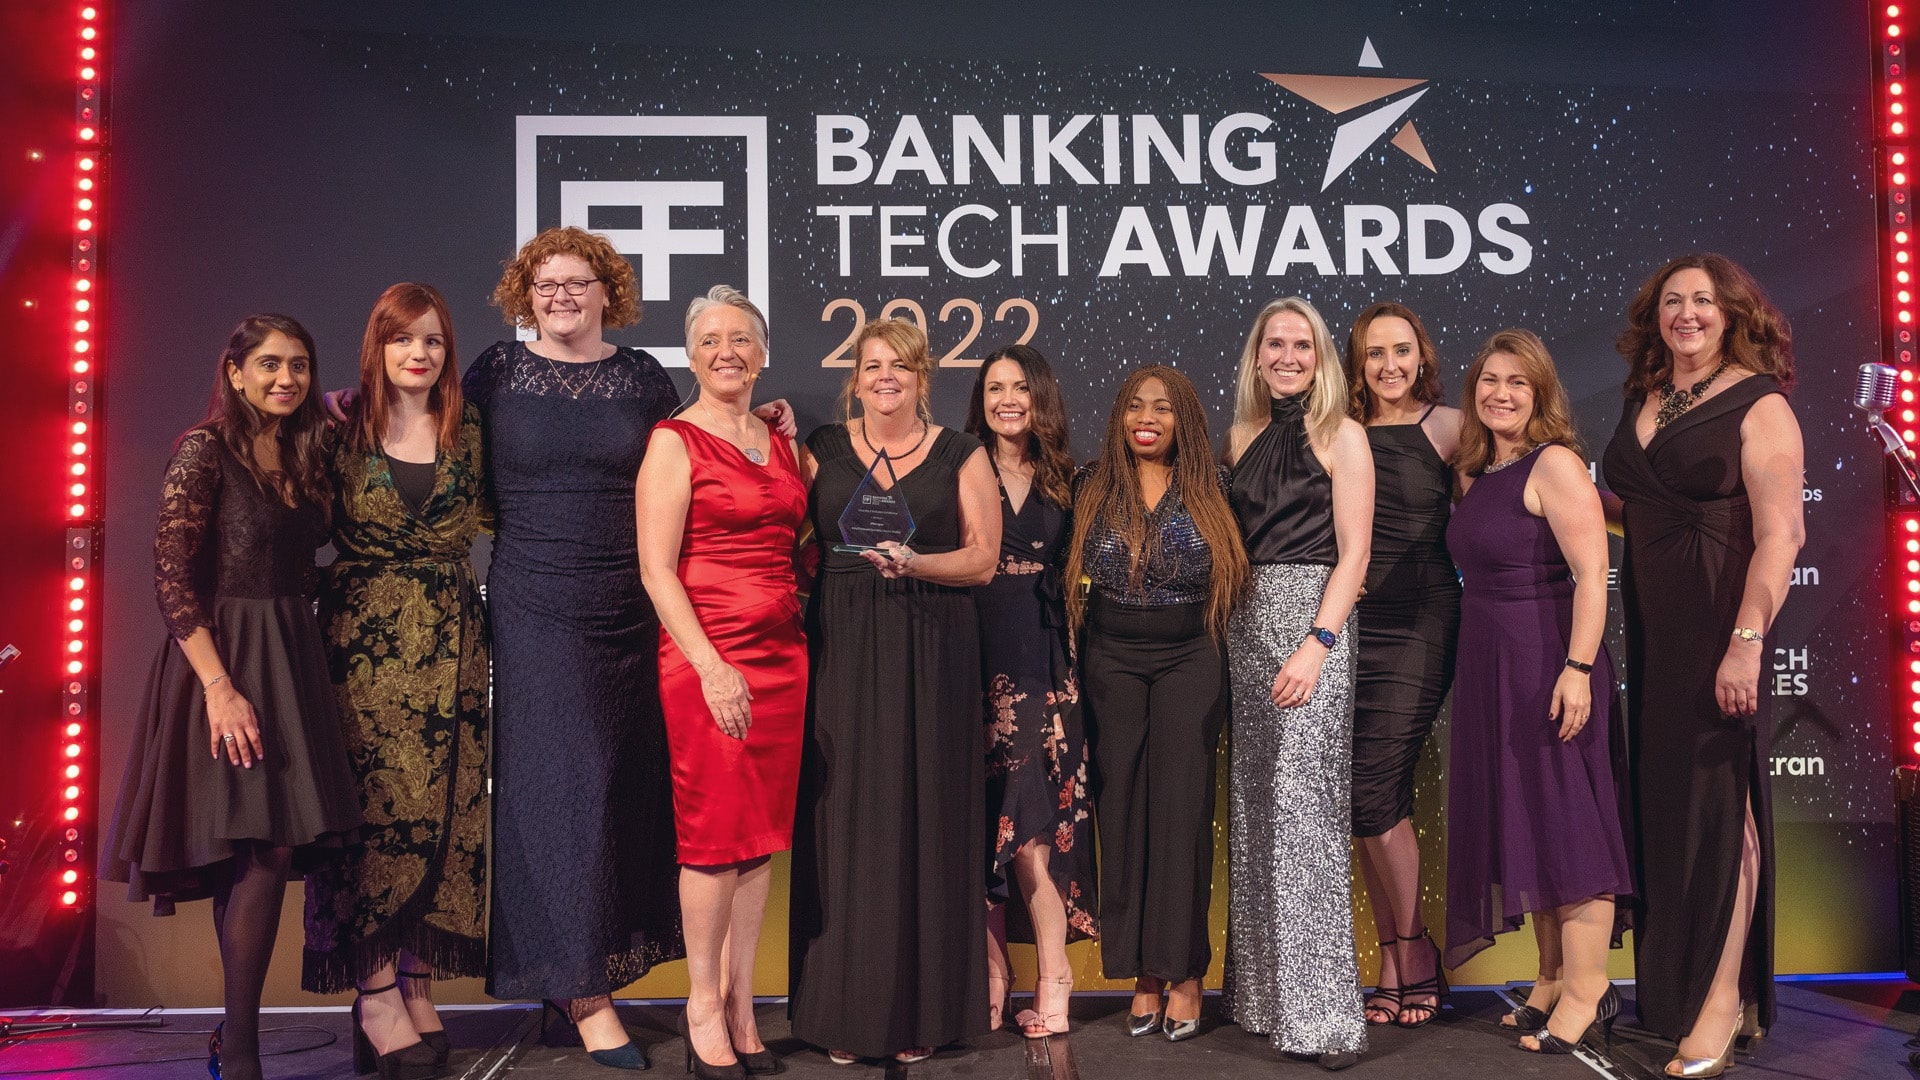 Torry Harris wins Banking Tech Awards 2022 for the best open banking solution, International